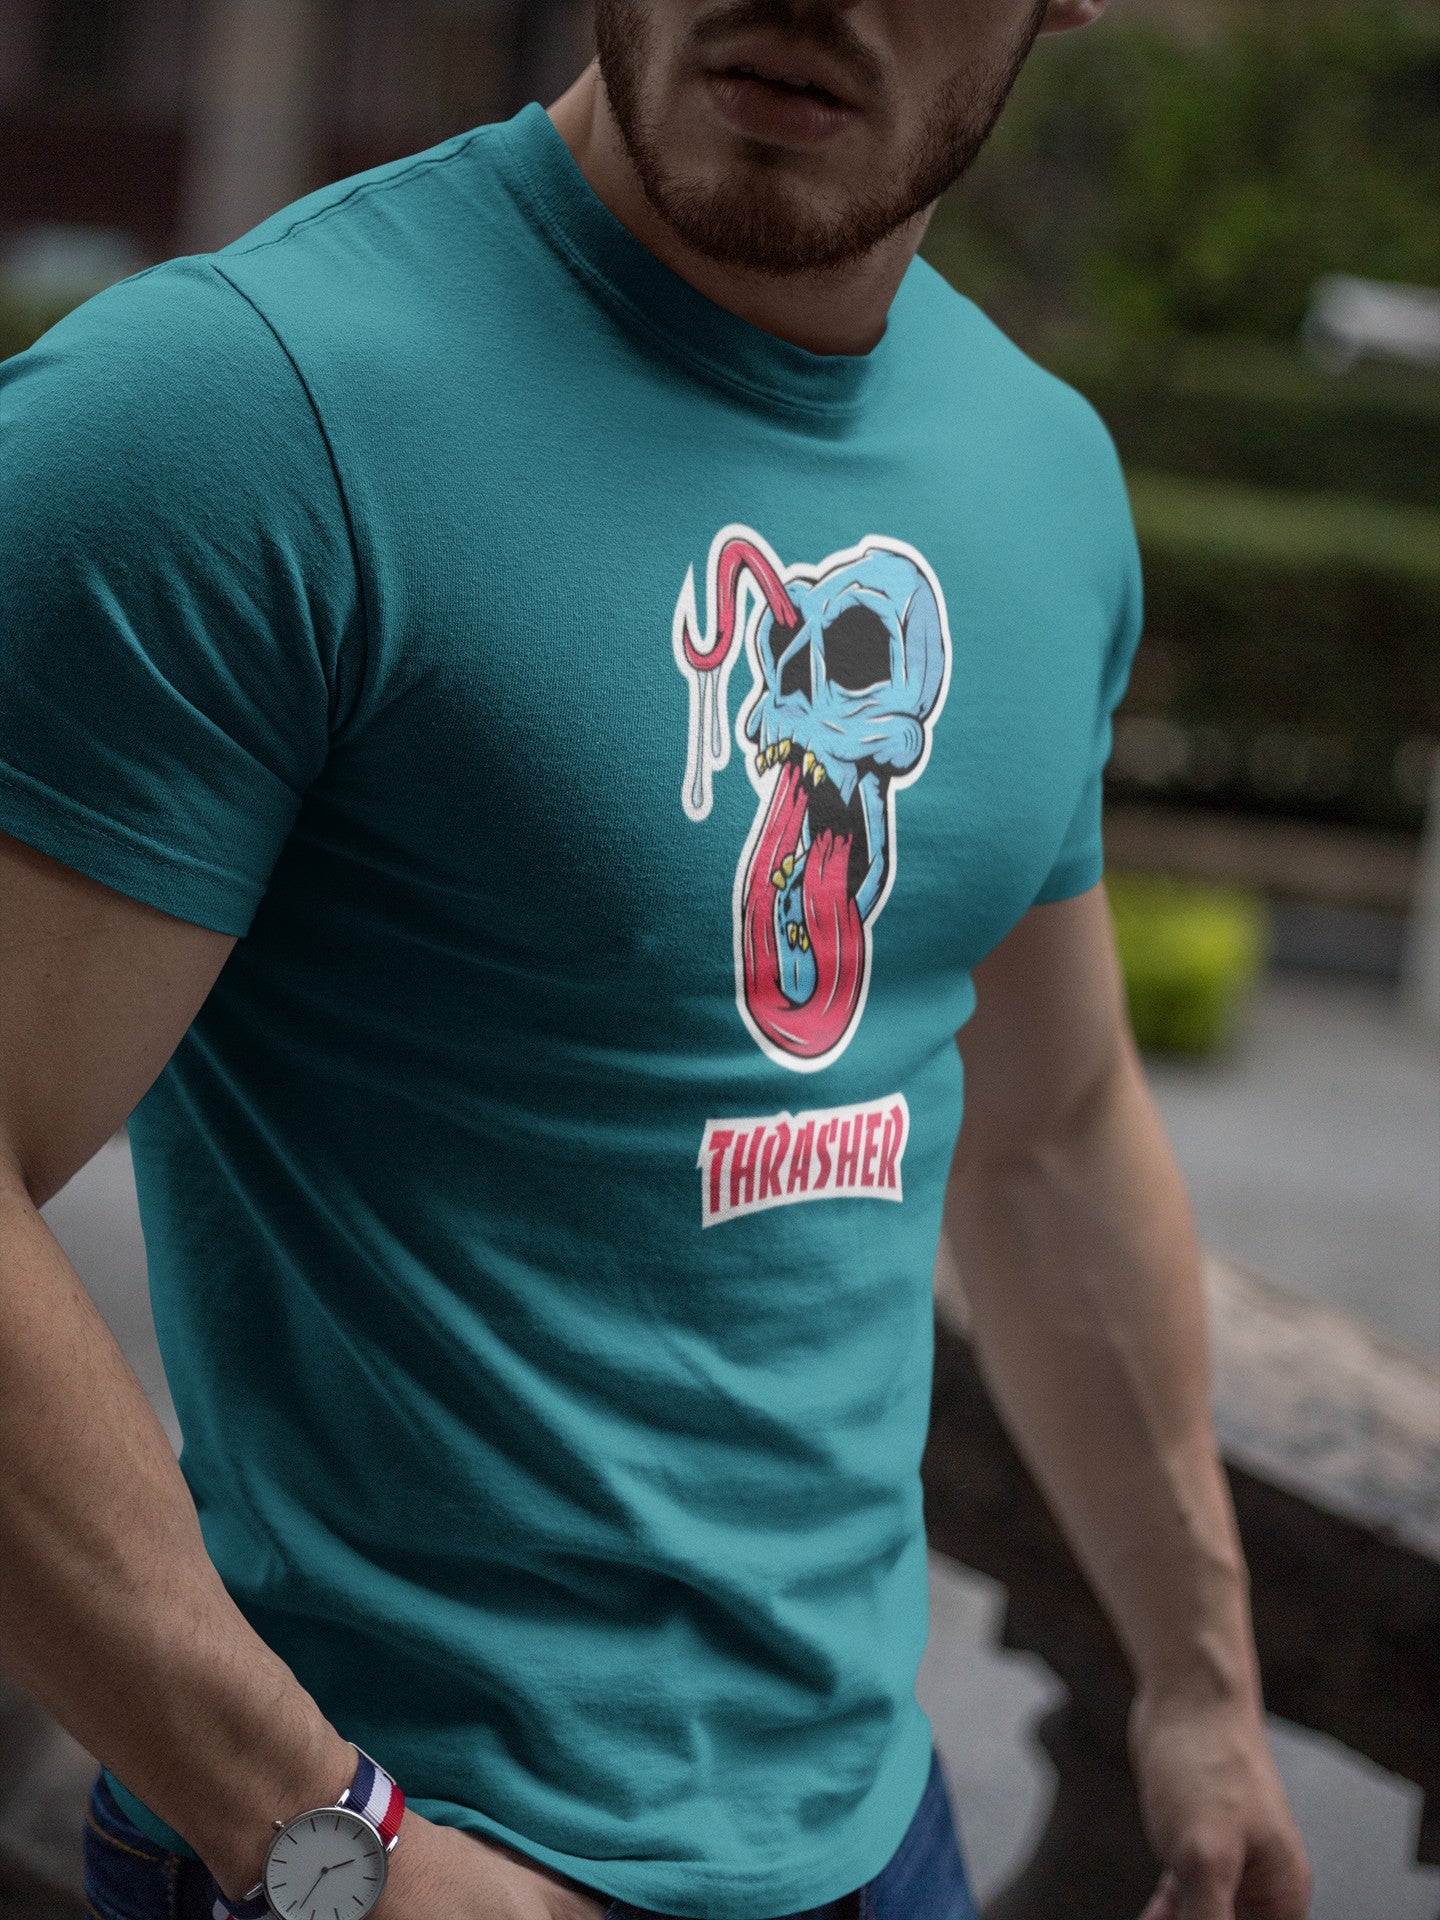 Gym T Shirt - Thrasher with premium cotton lycra. The Sports T Shirt by Strong Soul